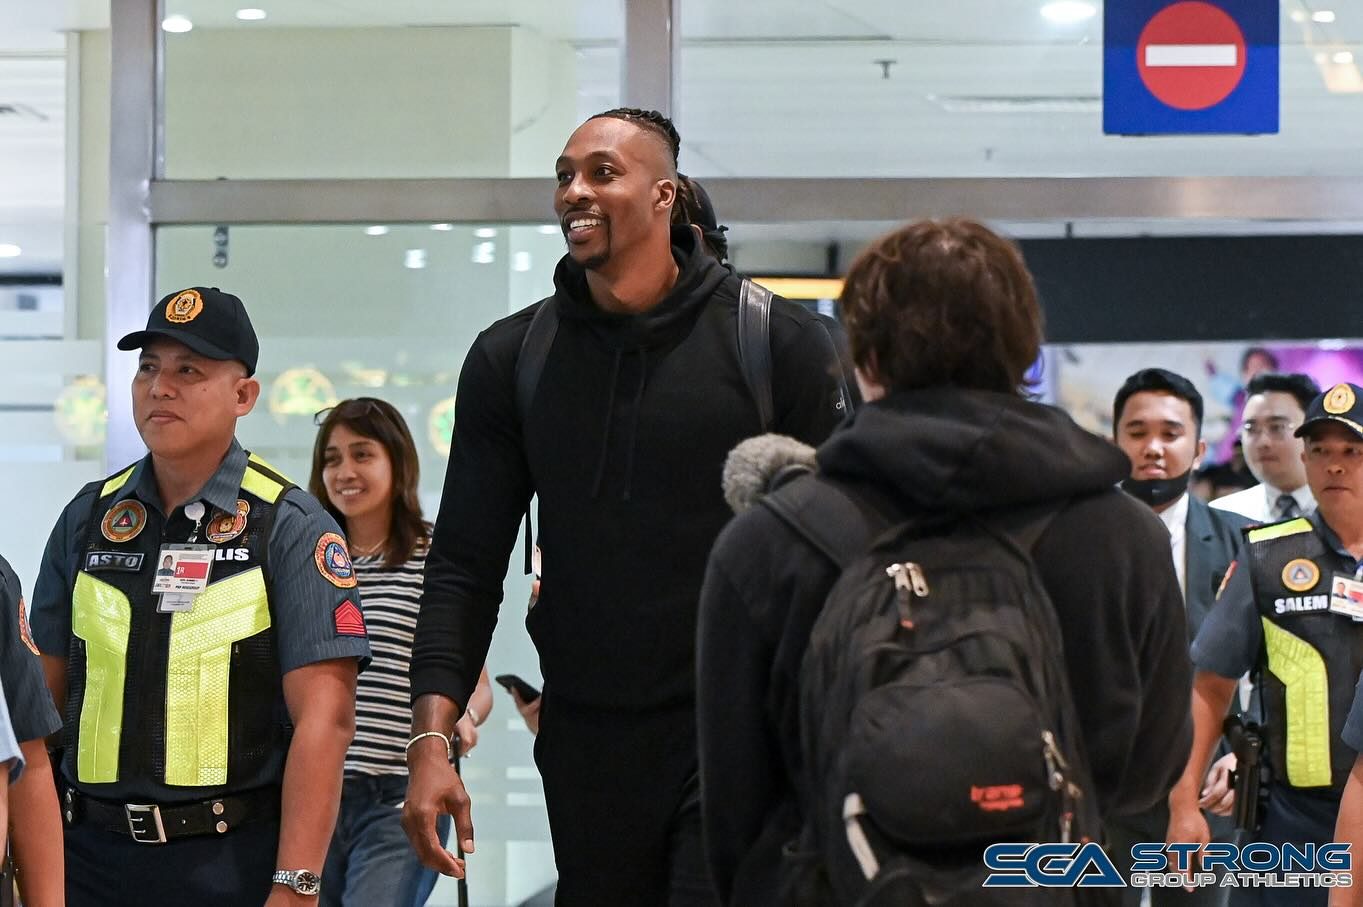 LOOK: Dwight Howard lands in the Philippines ahead of Dubai tournament